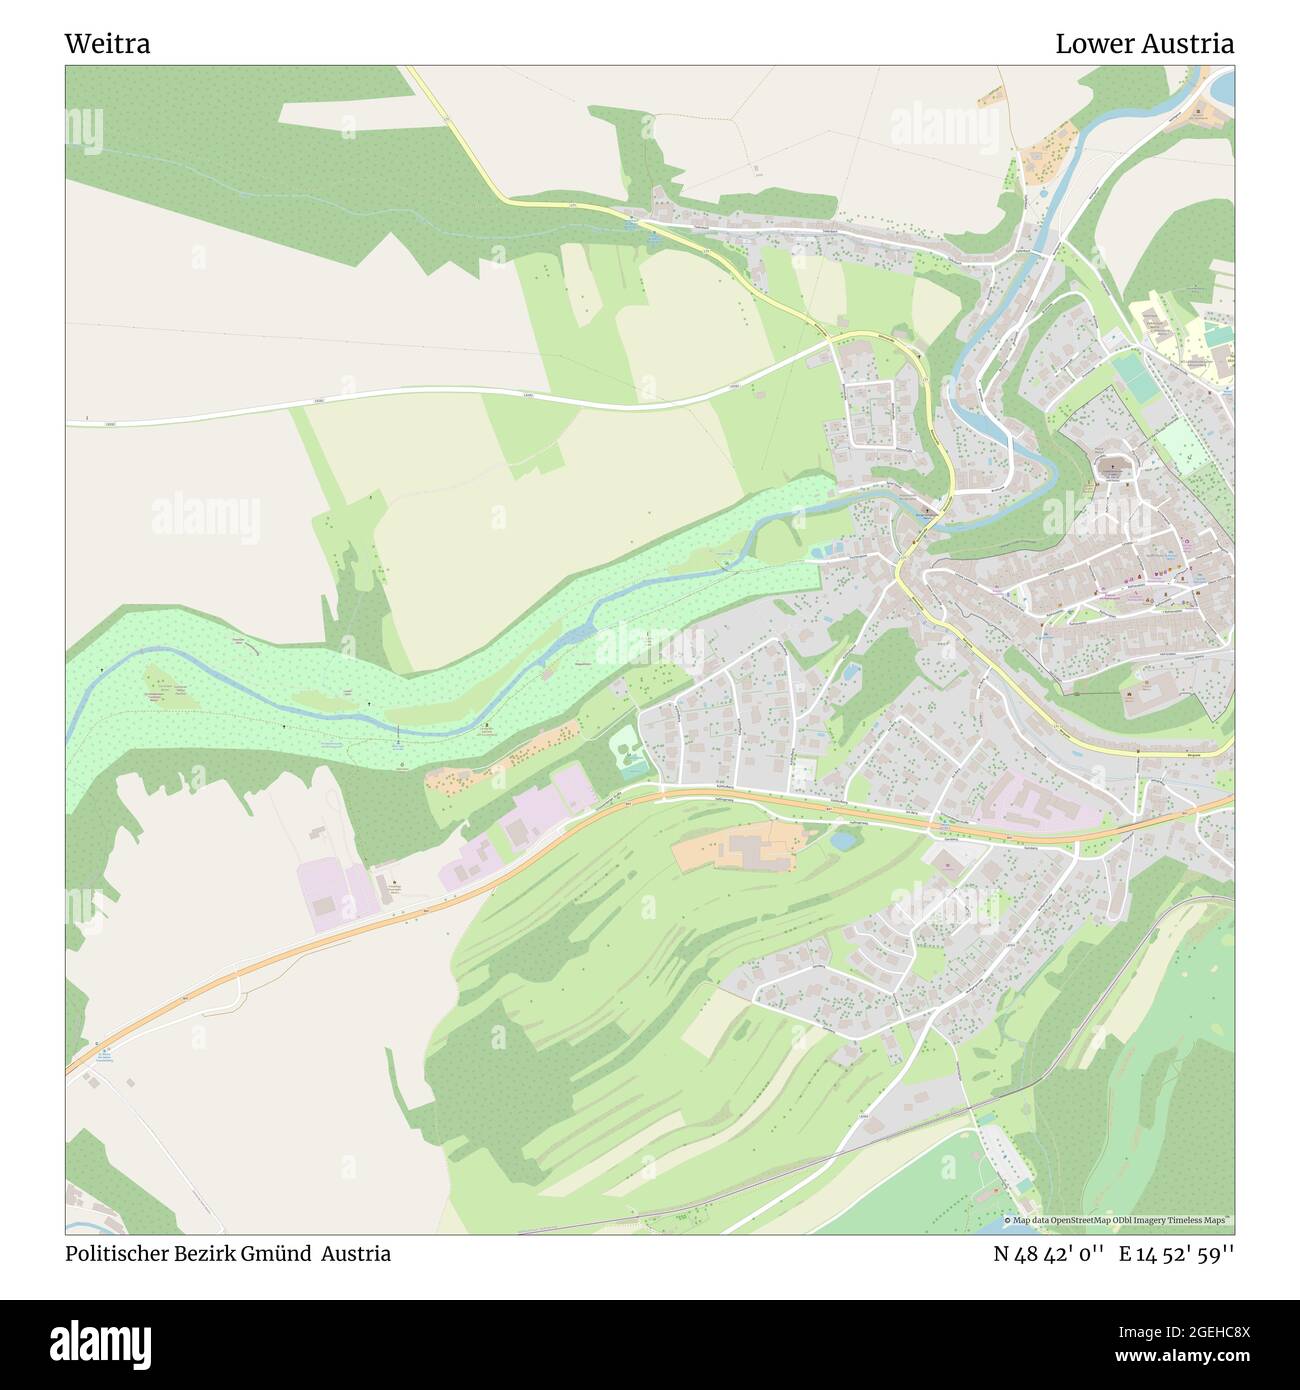 Weitra, Politischer Bezirk Gmünd, Austria, Lower Austria, N 48 42' 0'', E 14 52' 59'', map, Timeless Map published in 2021. Travelers, explorers and adventurers like Florence Nightingale, David Livingstone, Ernest Shackleton, Lewis and Clark and Sherlock Holmes relied on maps to plan travels to the world's most remote corners, Timeless Maps is mapping most locations on the globe, showing the achievement of great dreams Stock Photo